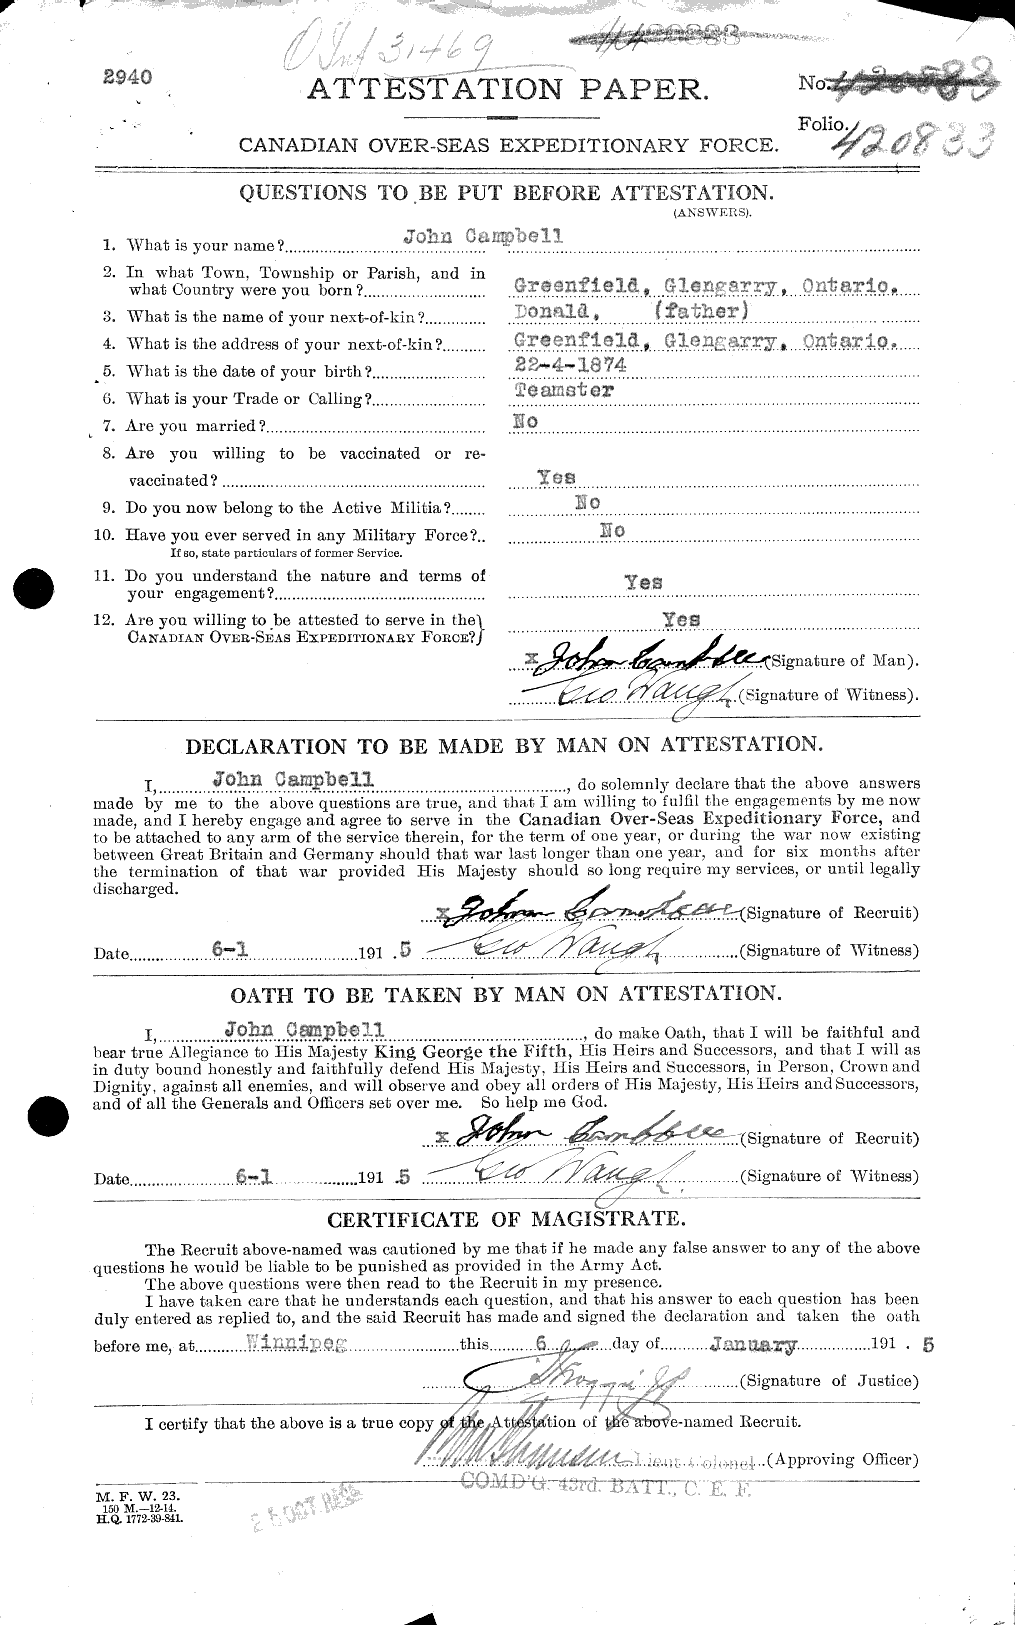 Personnel Records of the First World War - CEF 006829a